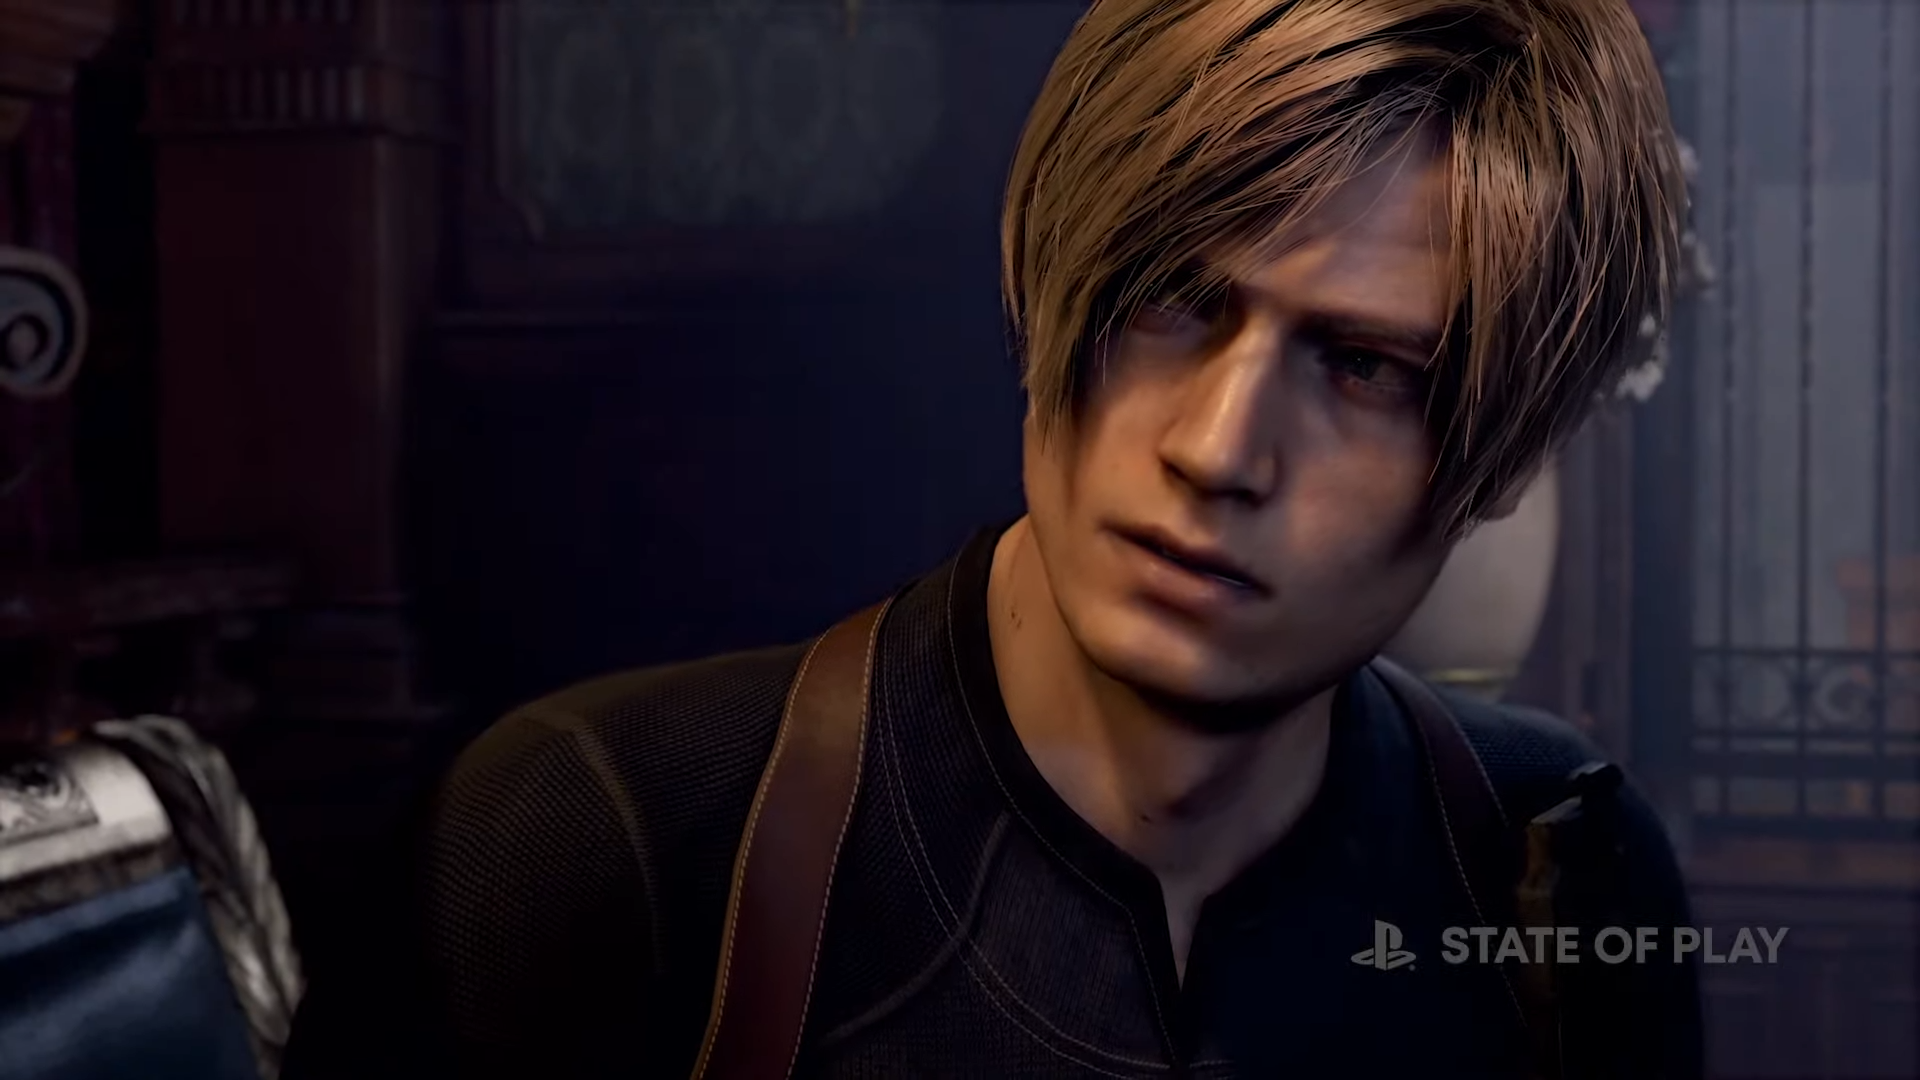 Resident Evil 4 Remake Gameplay Reveals 12 Minutes in Hell